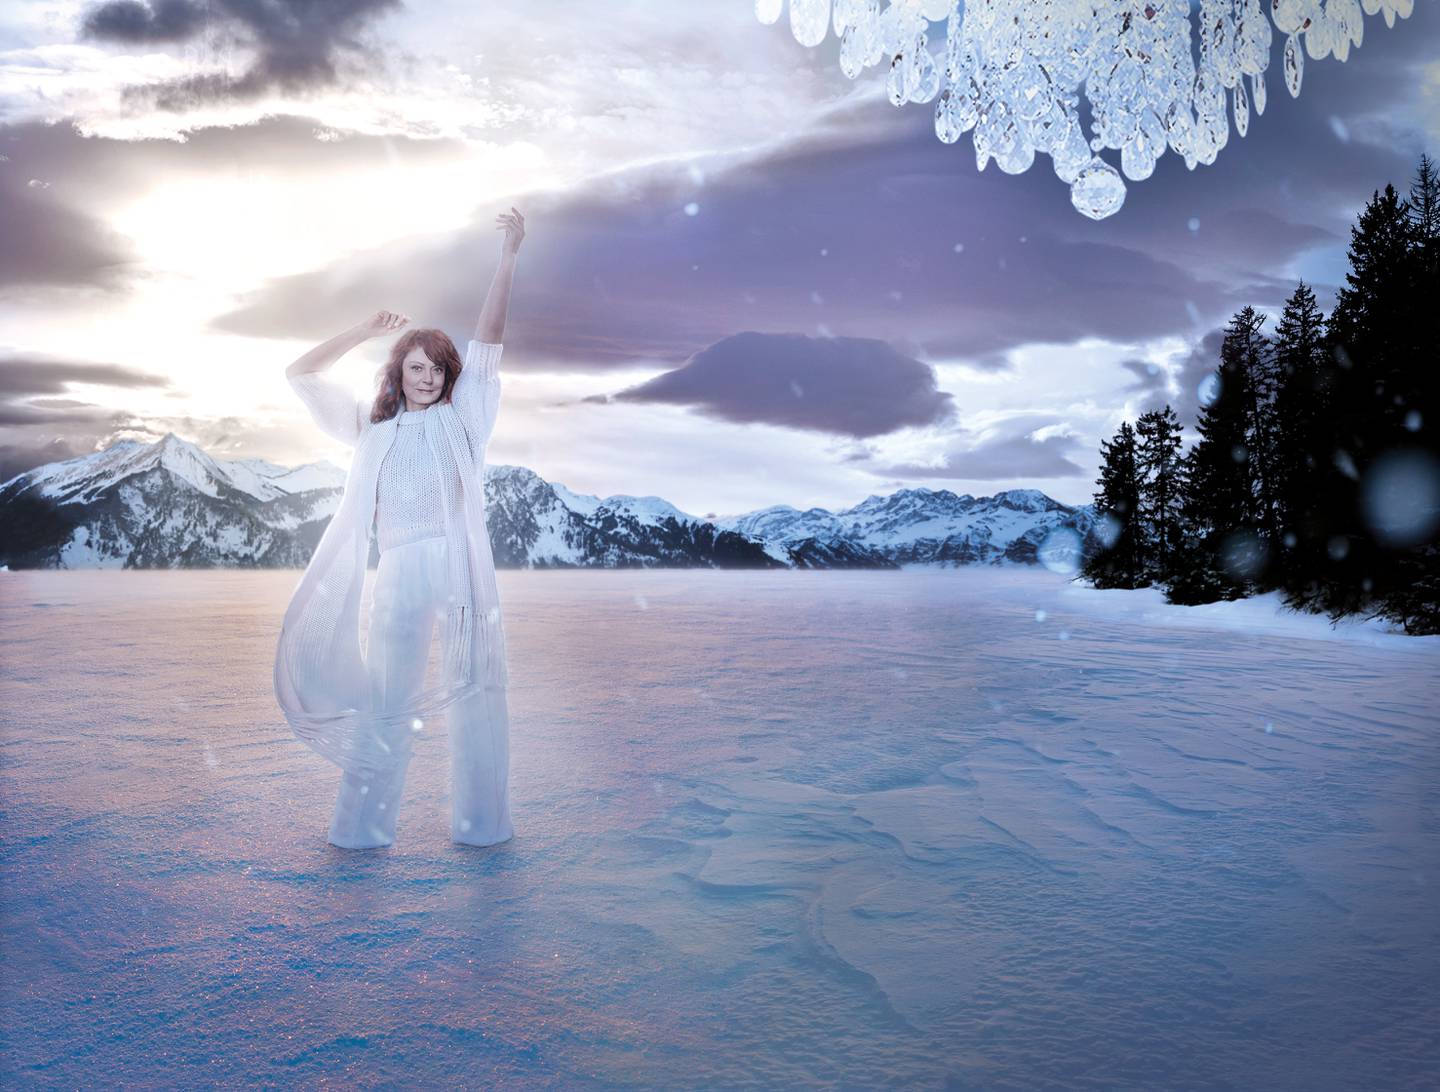 Susan Sarandon in Fairmont's 'Experience the Grandest of Feelings' ad campaign as the new global ambassador for the resort chain. Photo: Fairmont